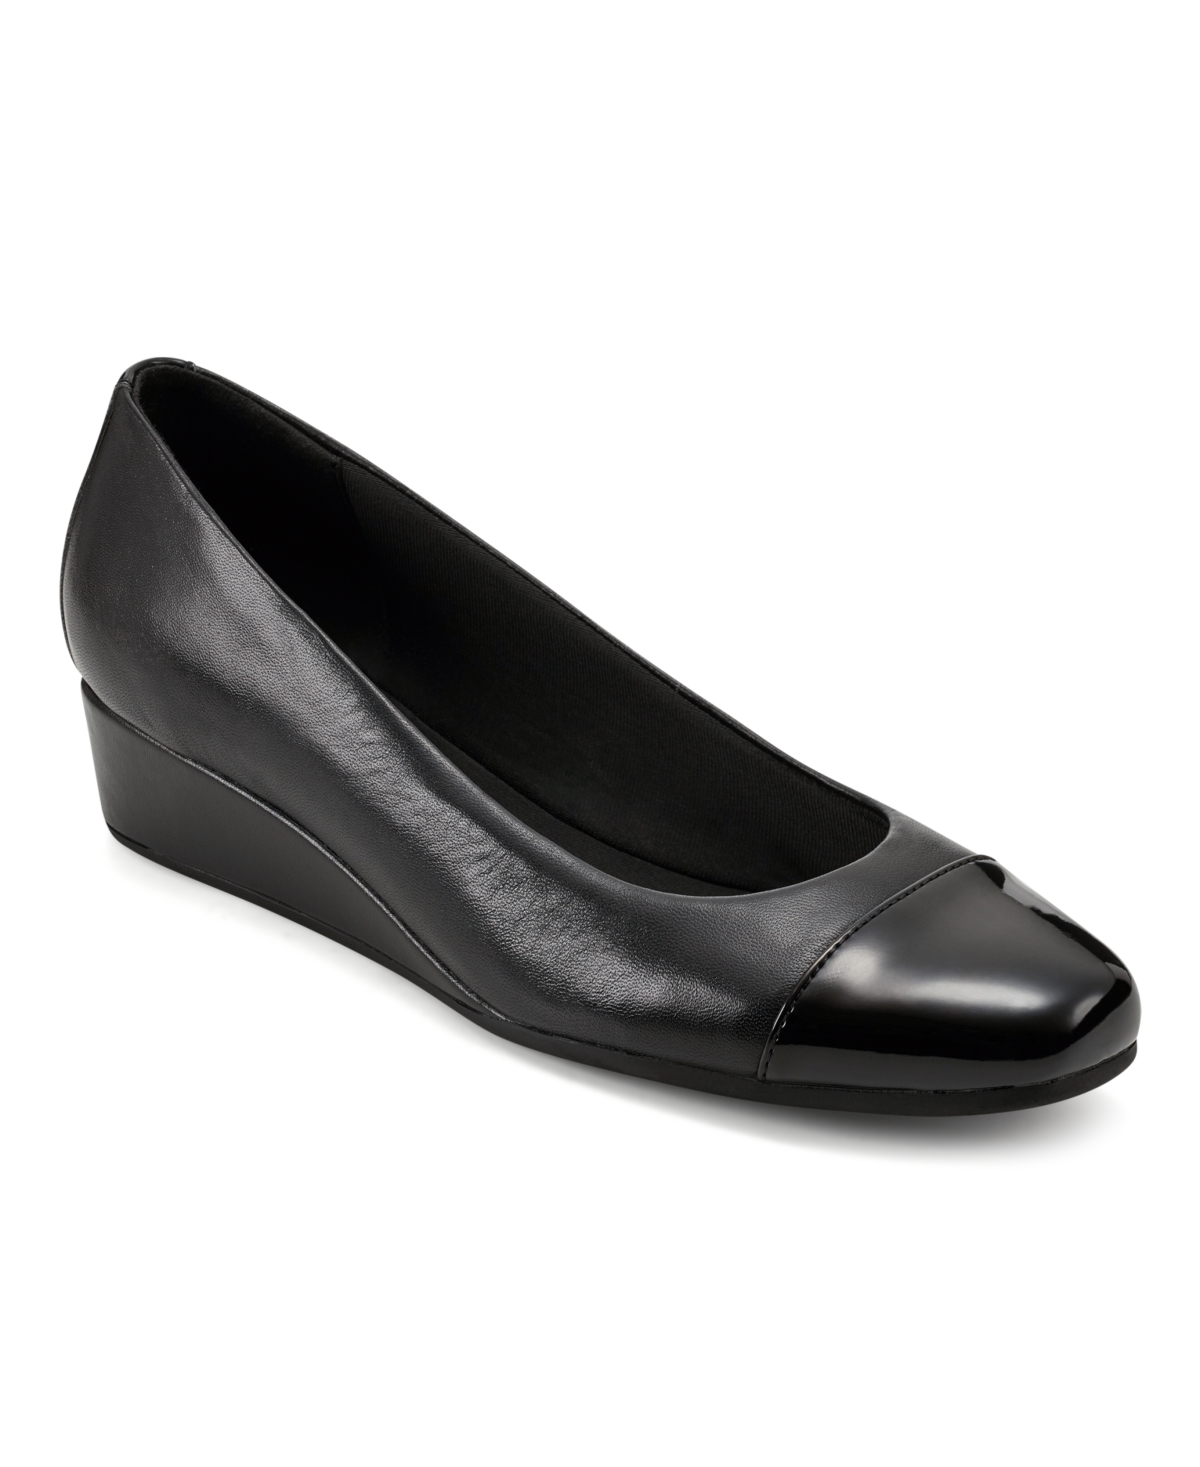 Women's Gracey Round Toe Slip-on Wedge Dress Pumps - Ivory Leather, Black - Leather, Faux Lea